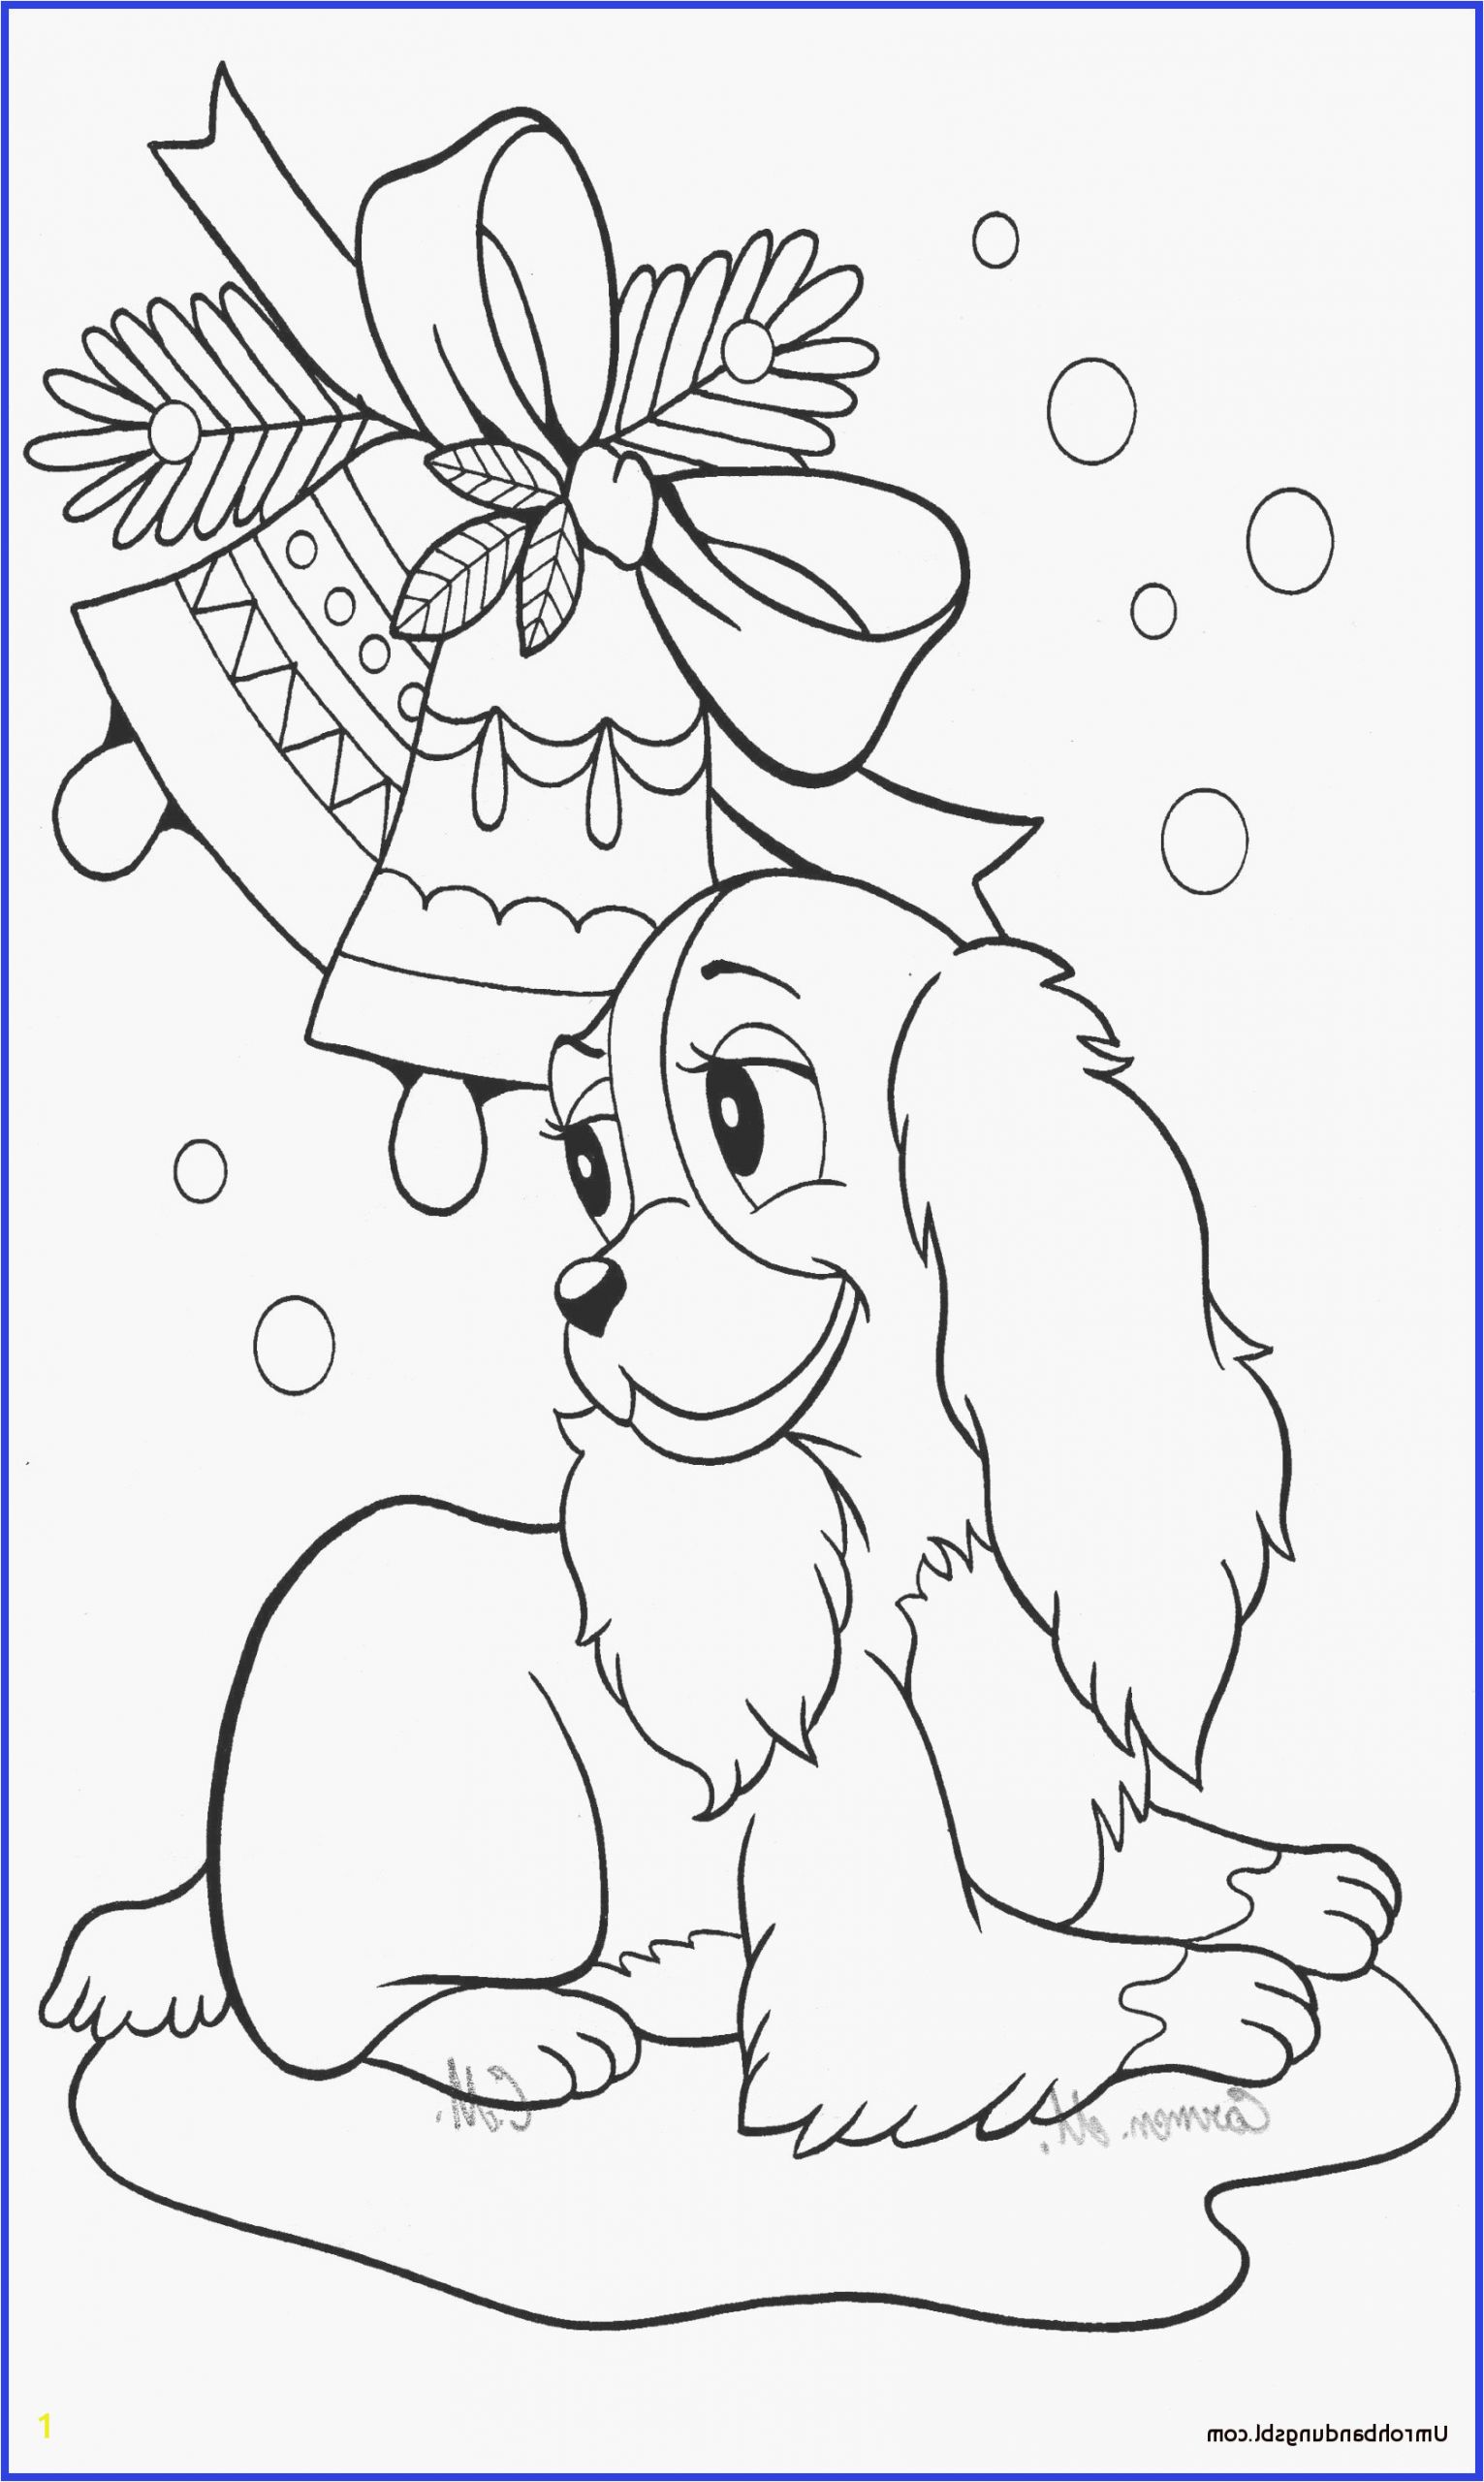 Free Printable Cow Coloring Pages 28 Inspirational Gallery Coloring Page for Free to Print